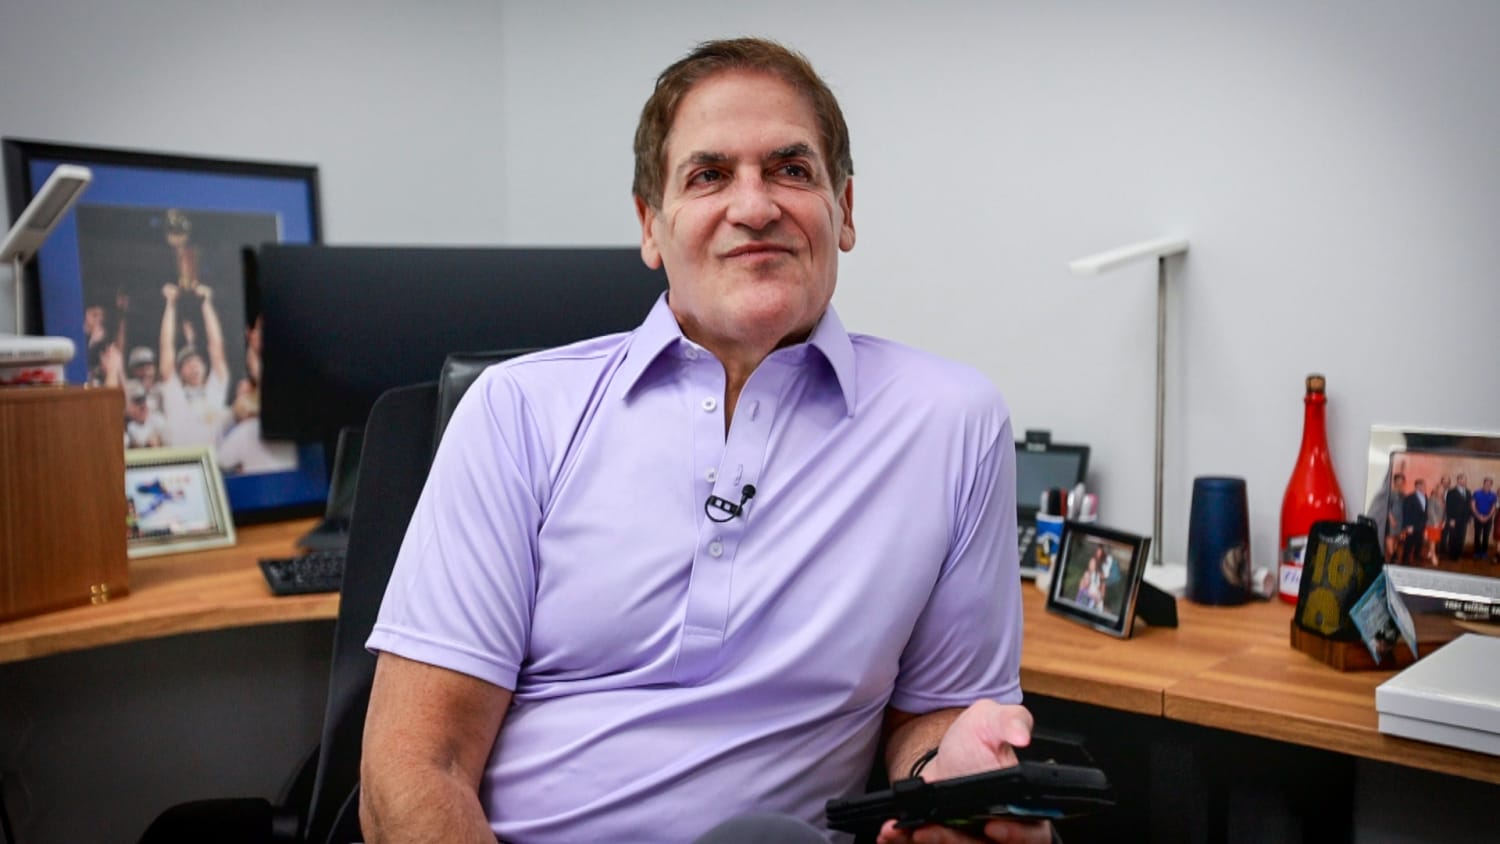 Cost Plus Drugs Co-founder Mark Cuban, Full Interview